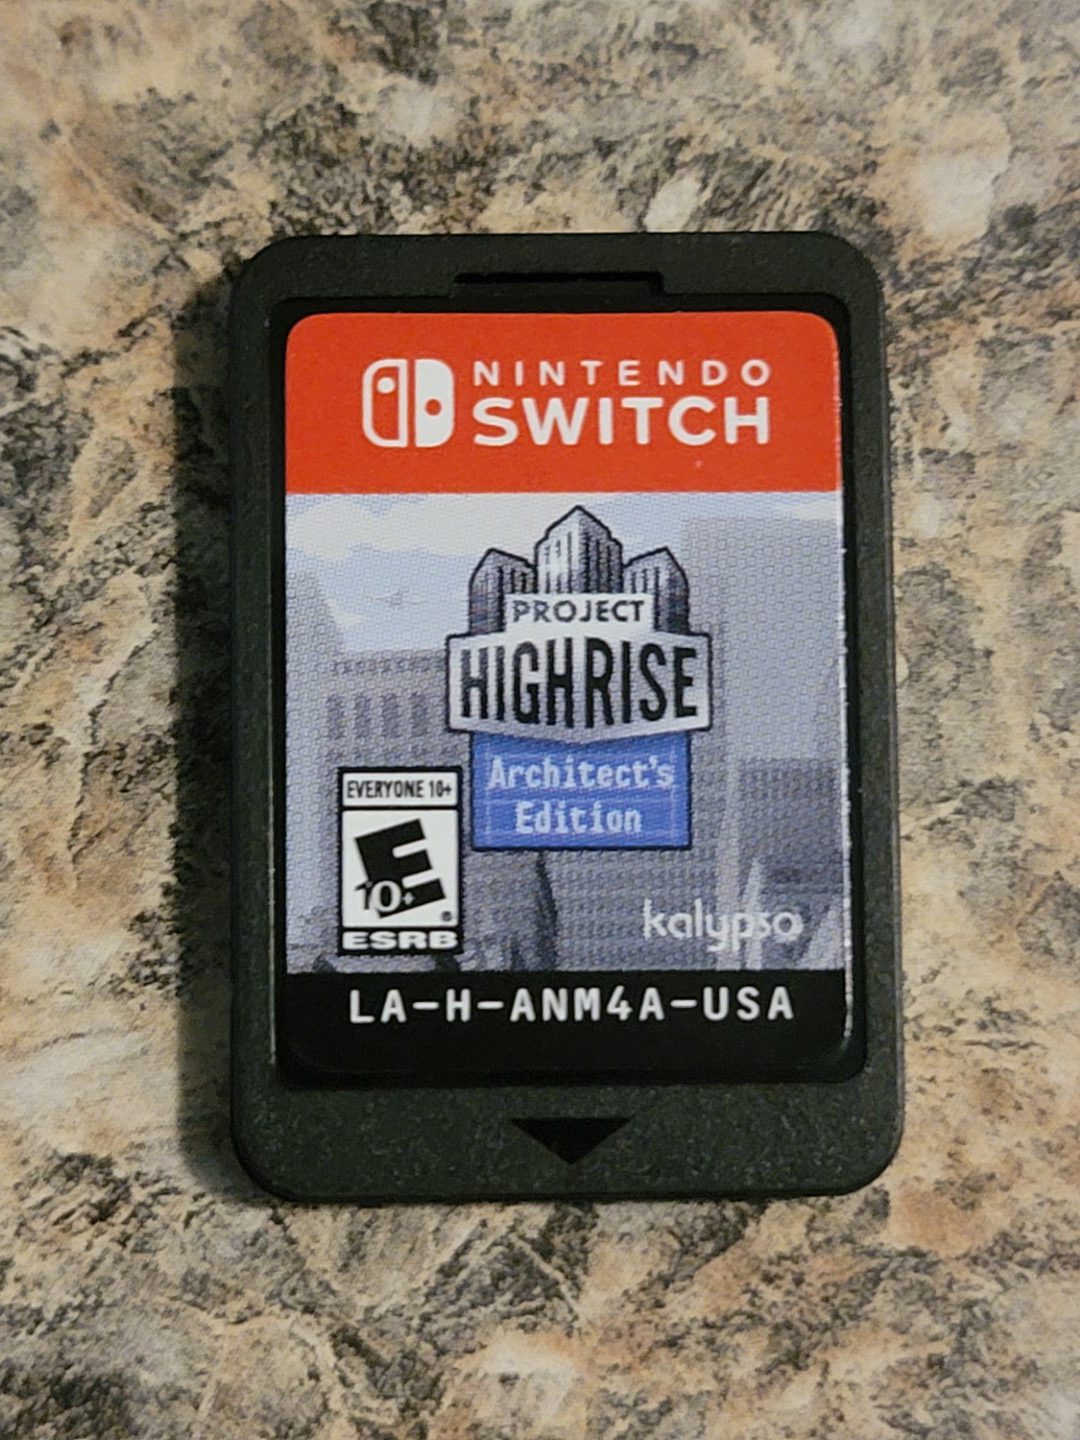 Project Highrise Architect's Edition Nintendo Switch 5